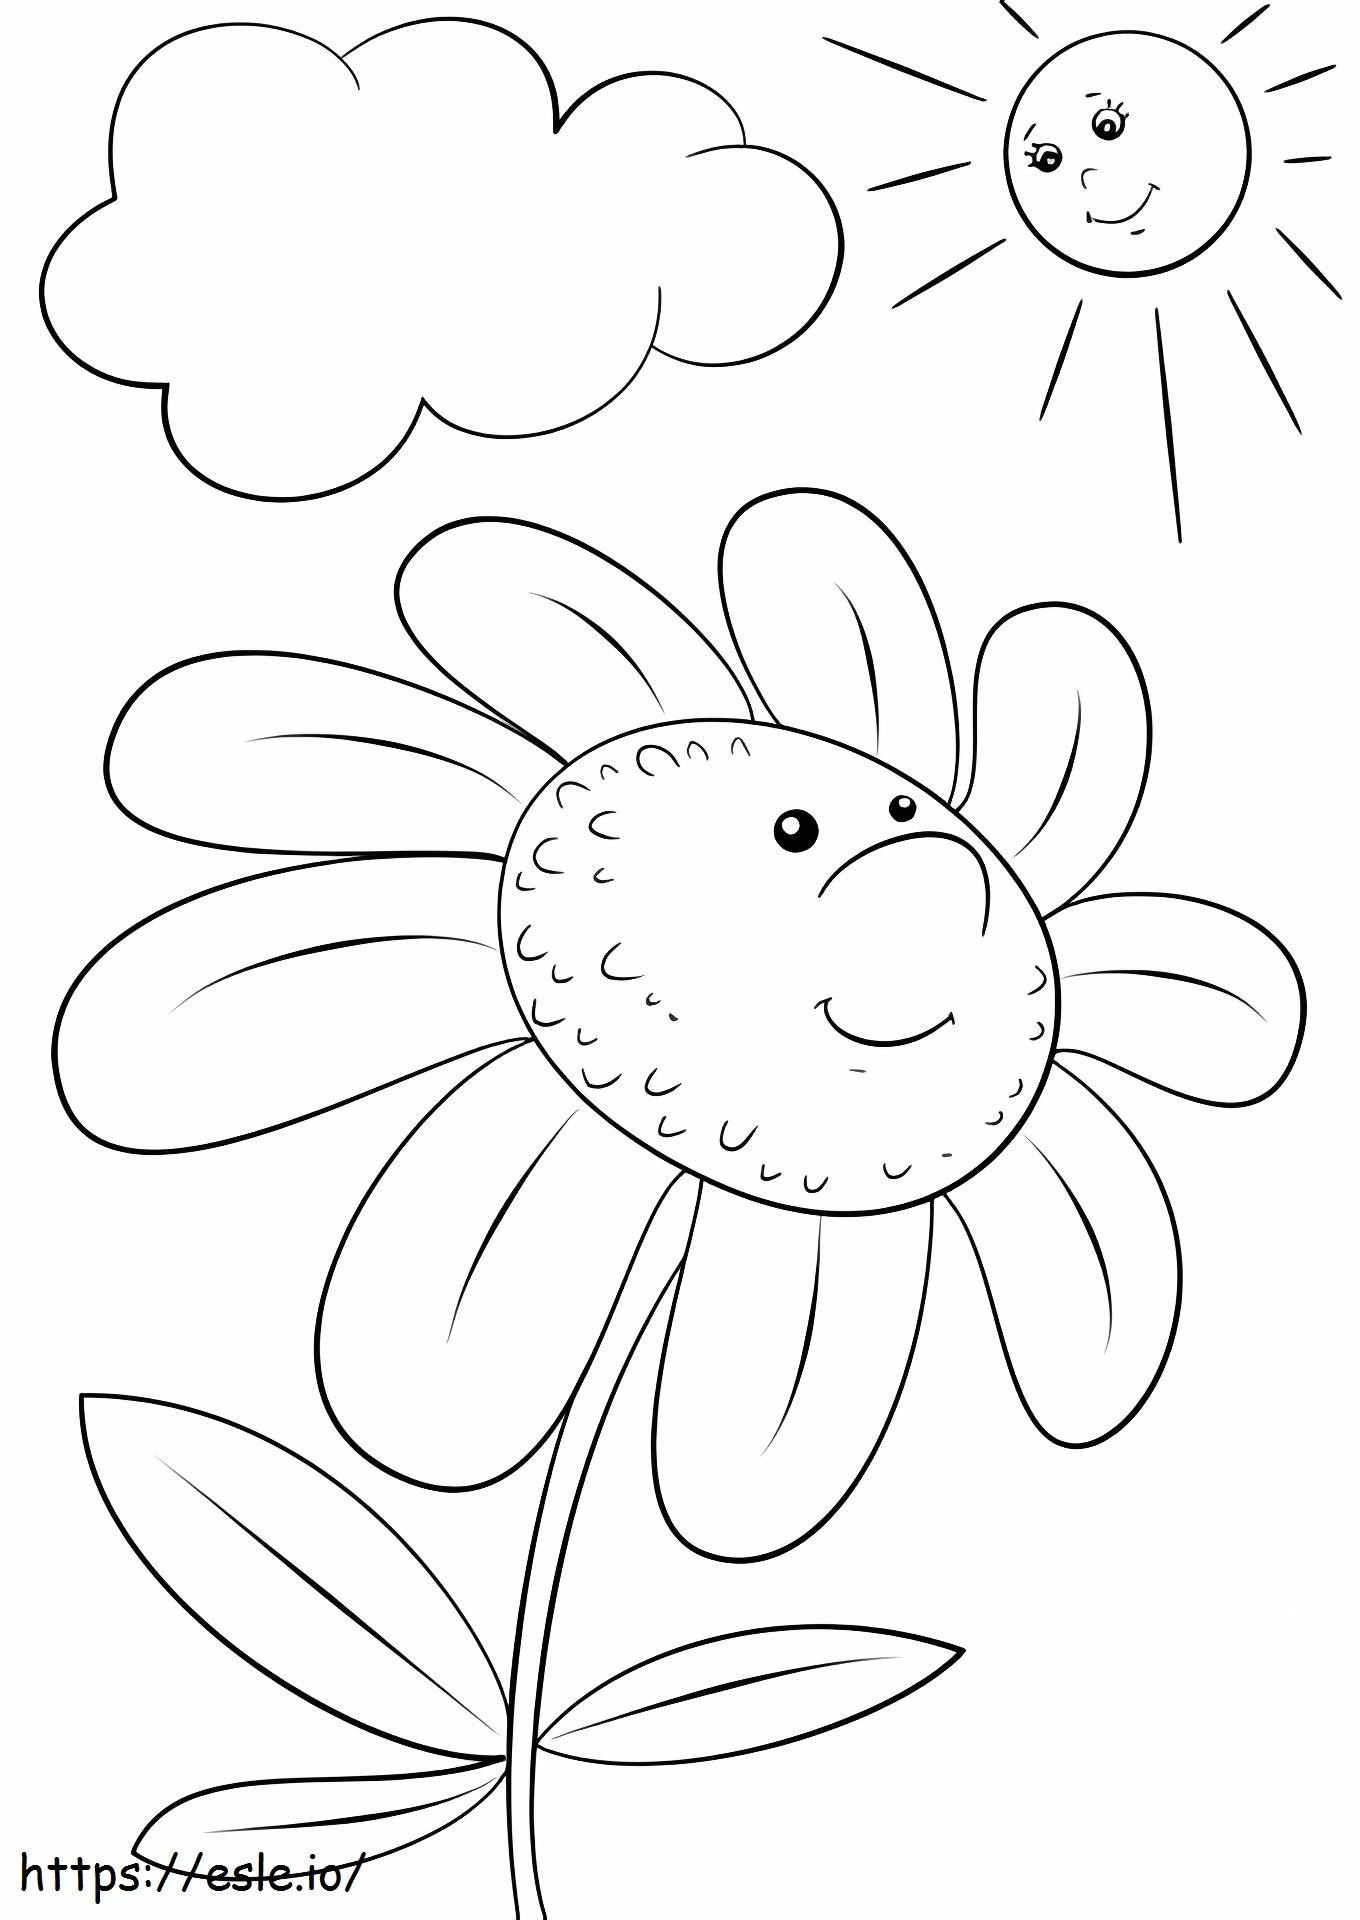 Cartoon Flower Character coloring page